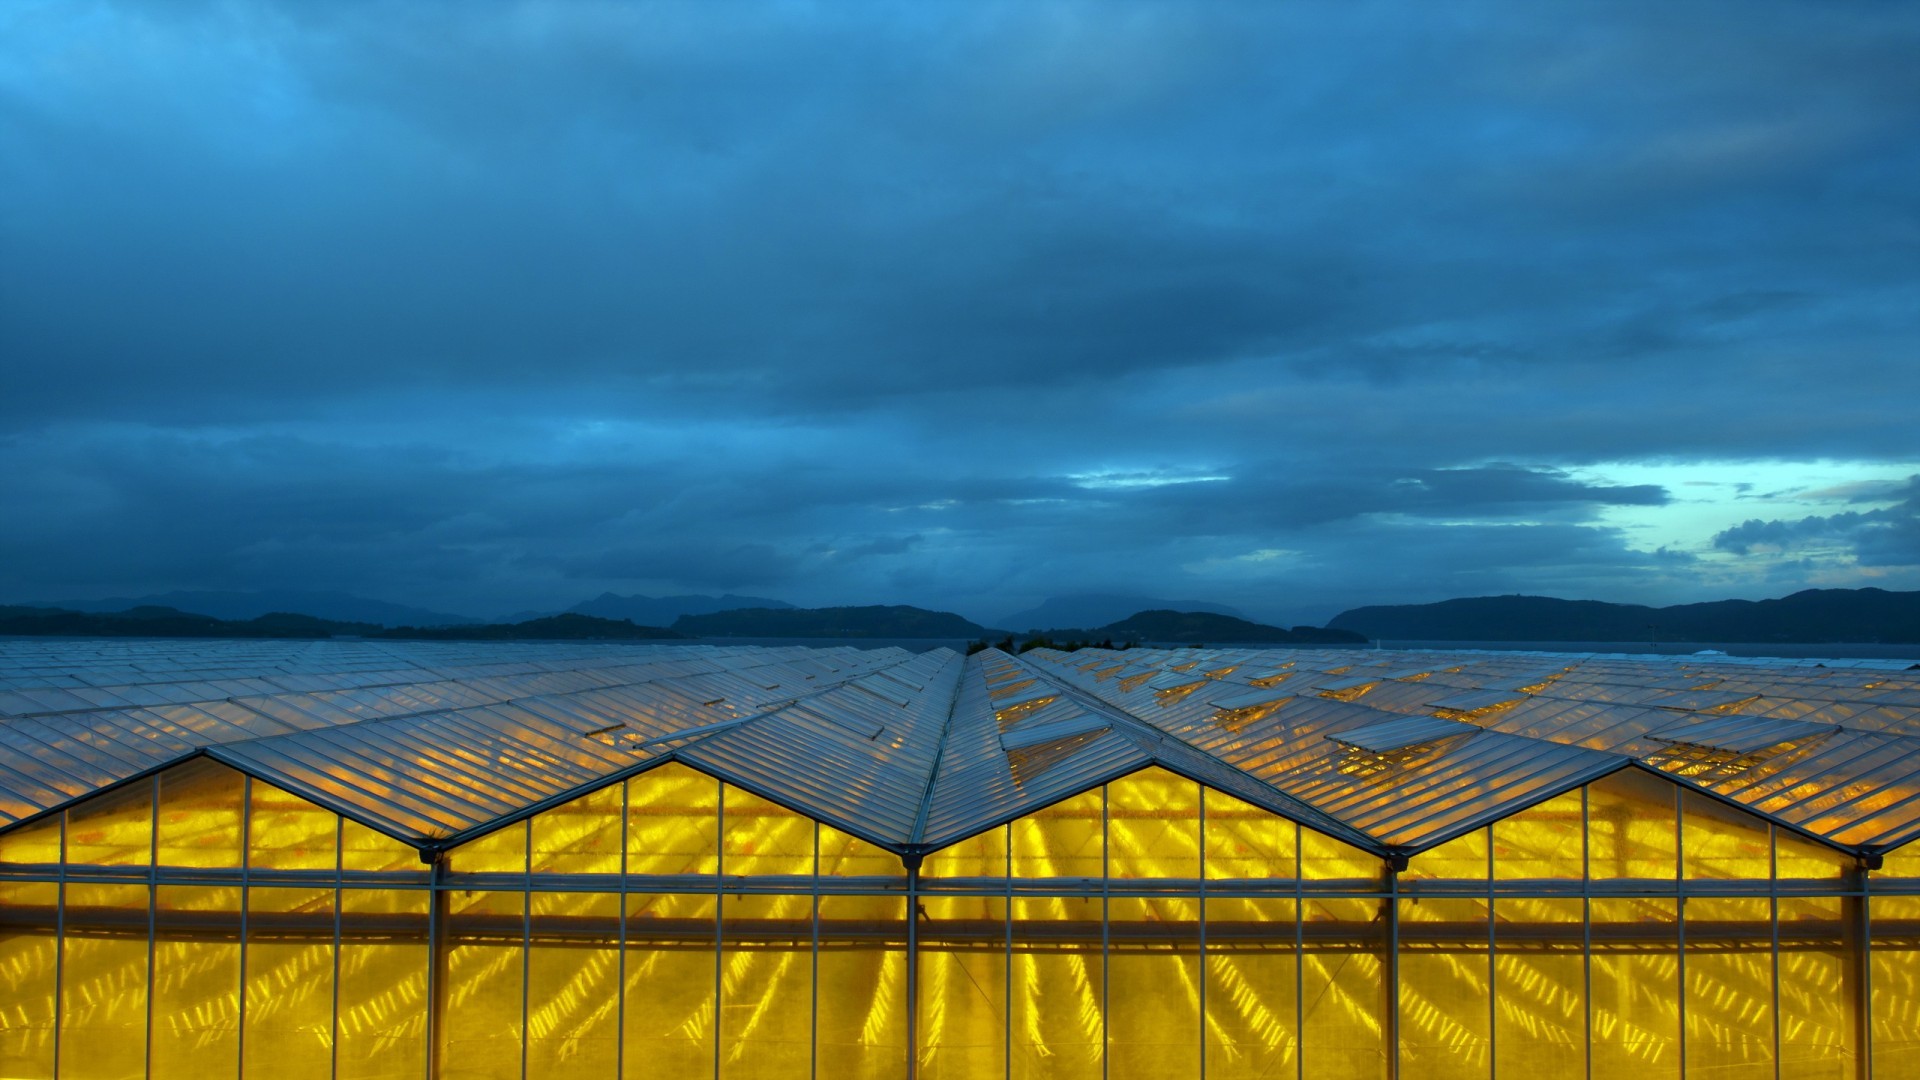 General 1920x1080 hills clouds greenhouse yellow blue glass